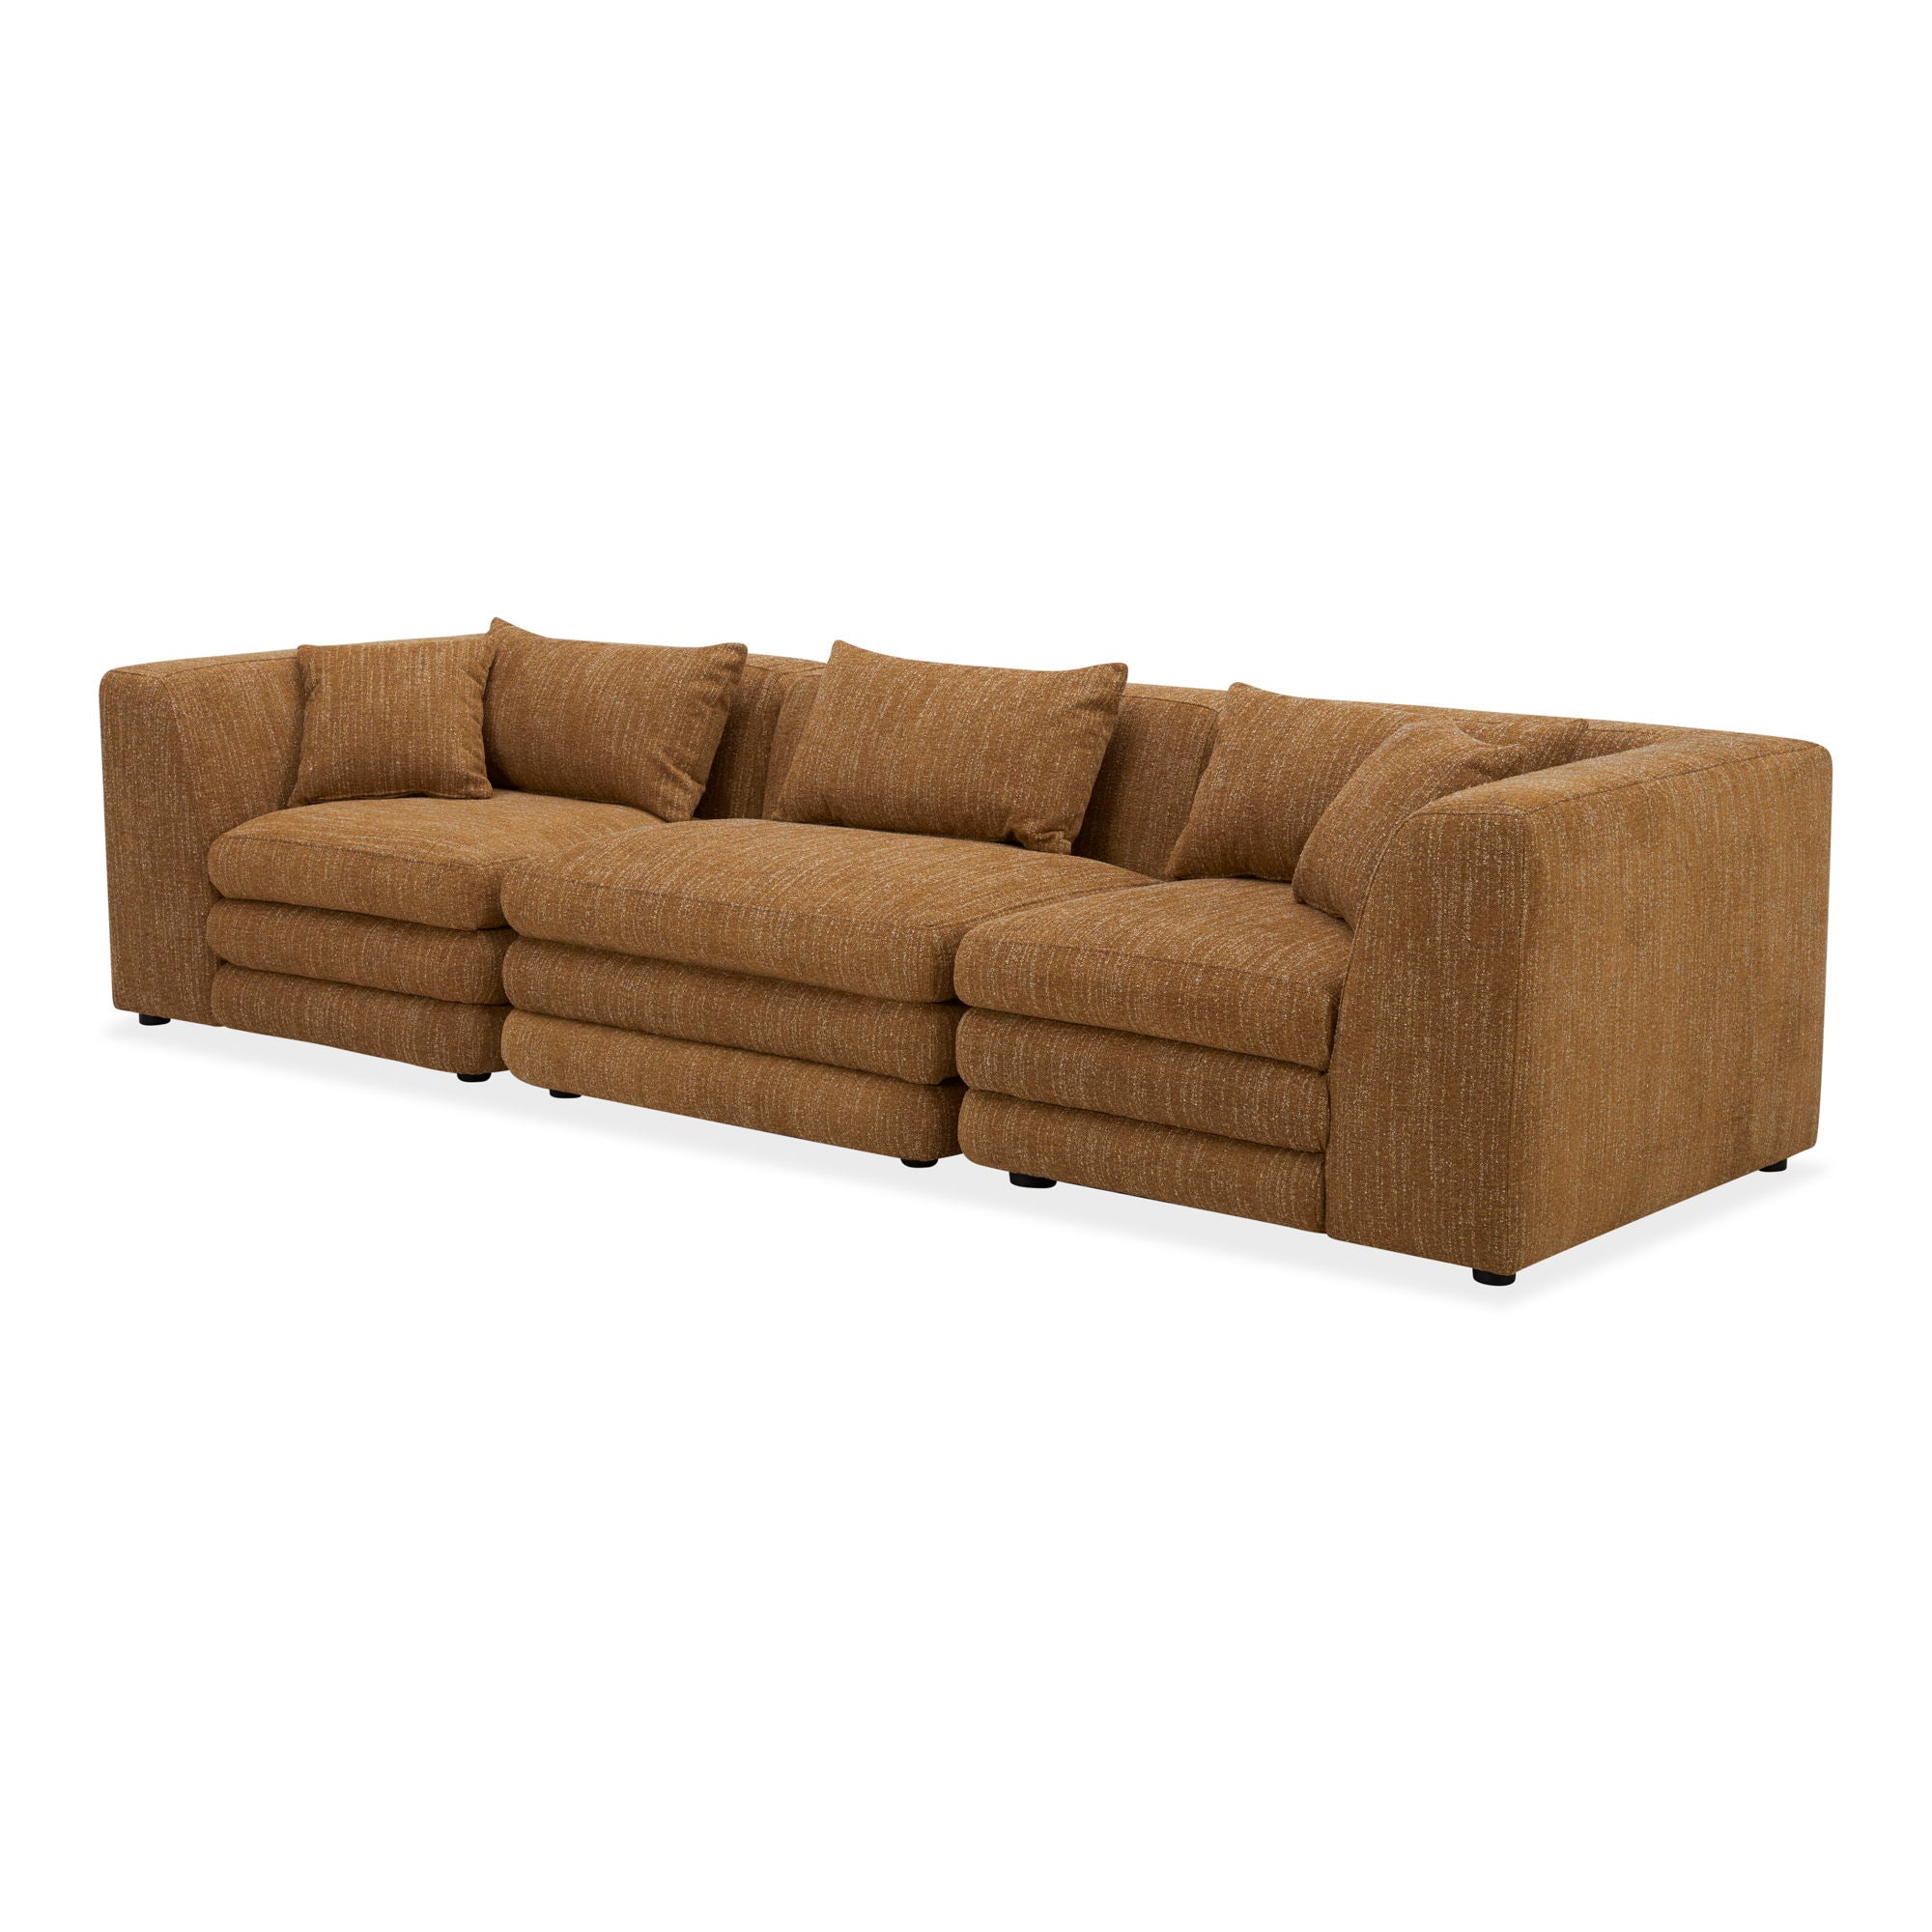 Lowtide - Modular Sofa - Amber Glow-Stationary Sectionals-American Furniture Outlet